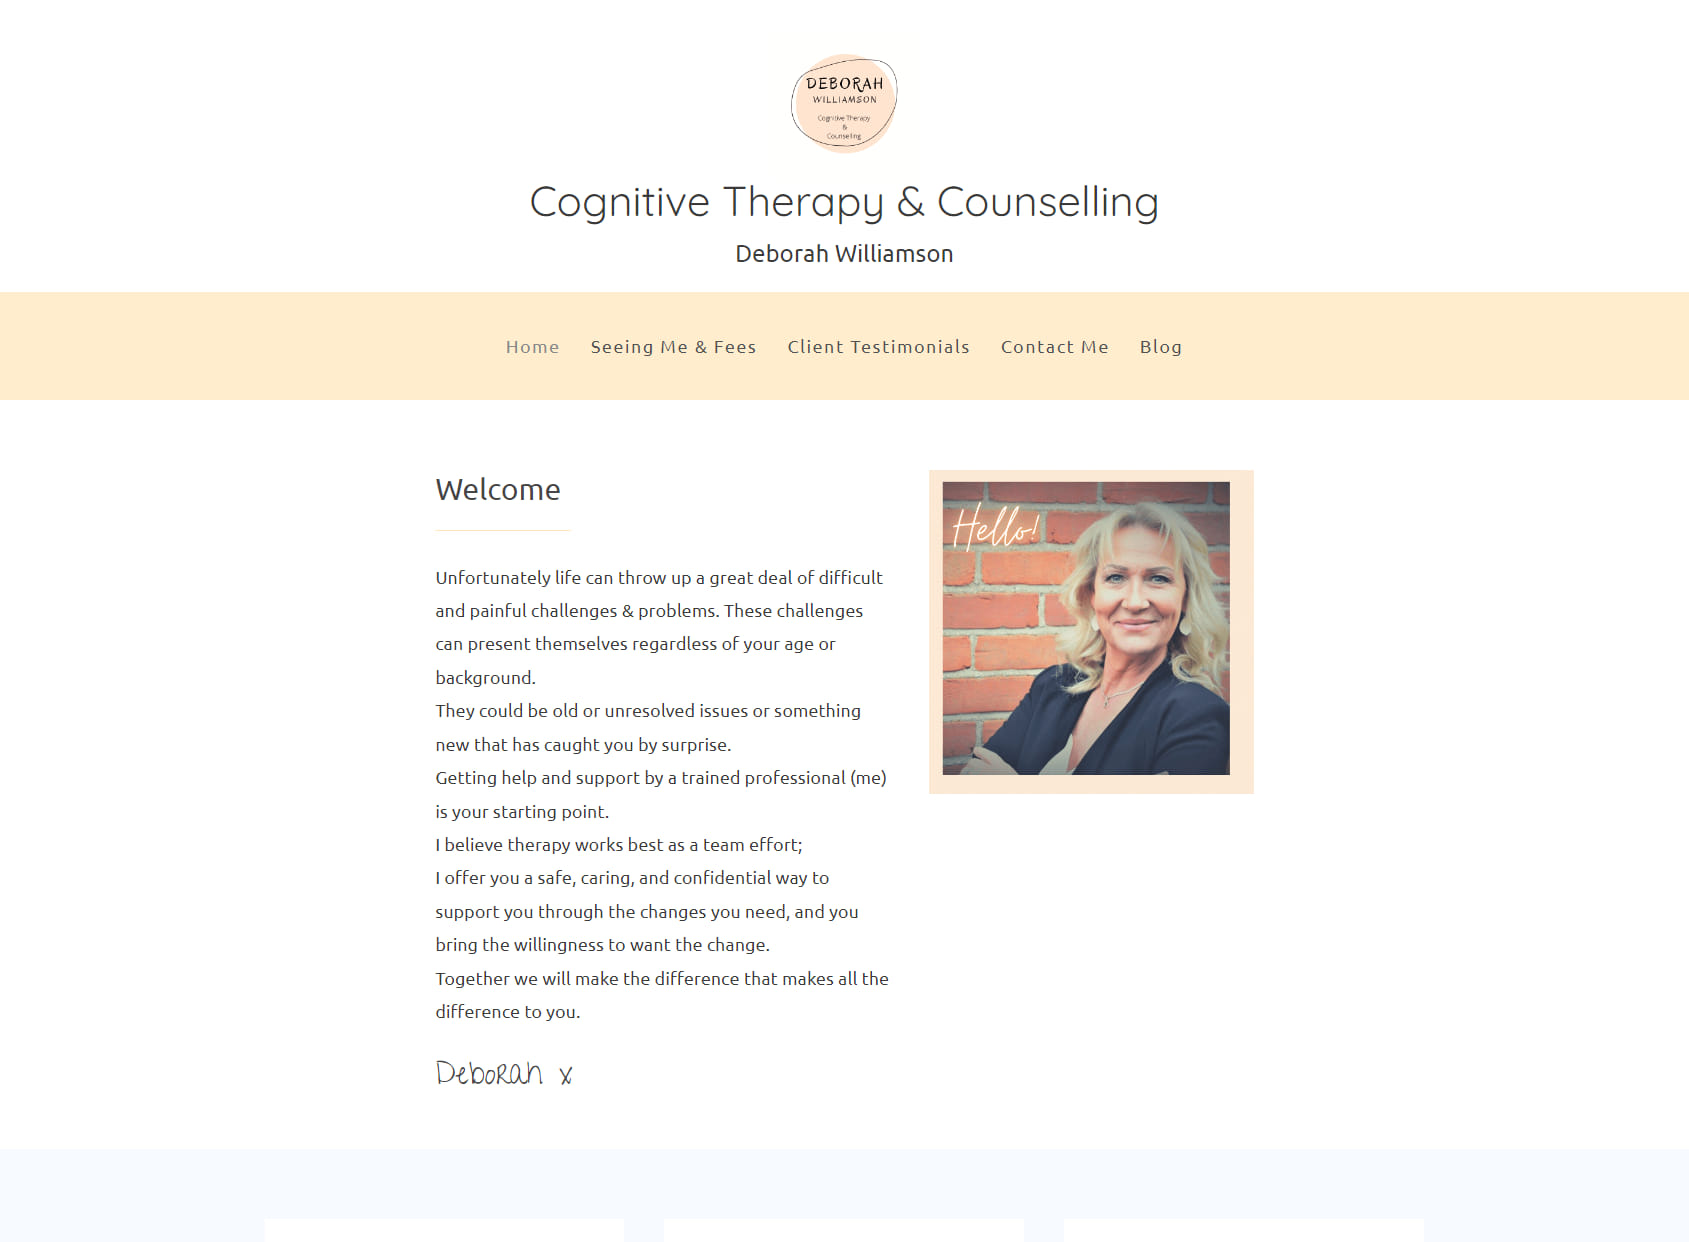 Cognitive Therapy and Counselling - Deborah Williamson